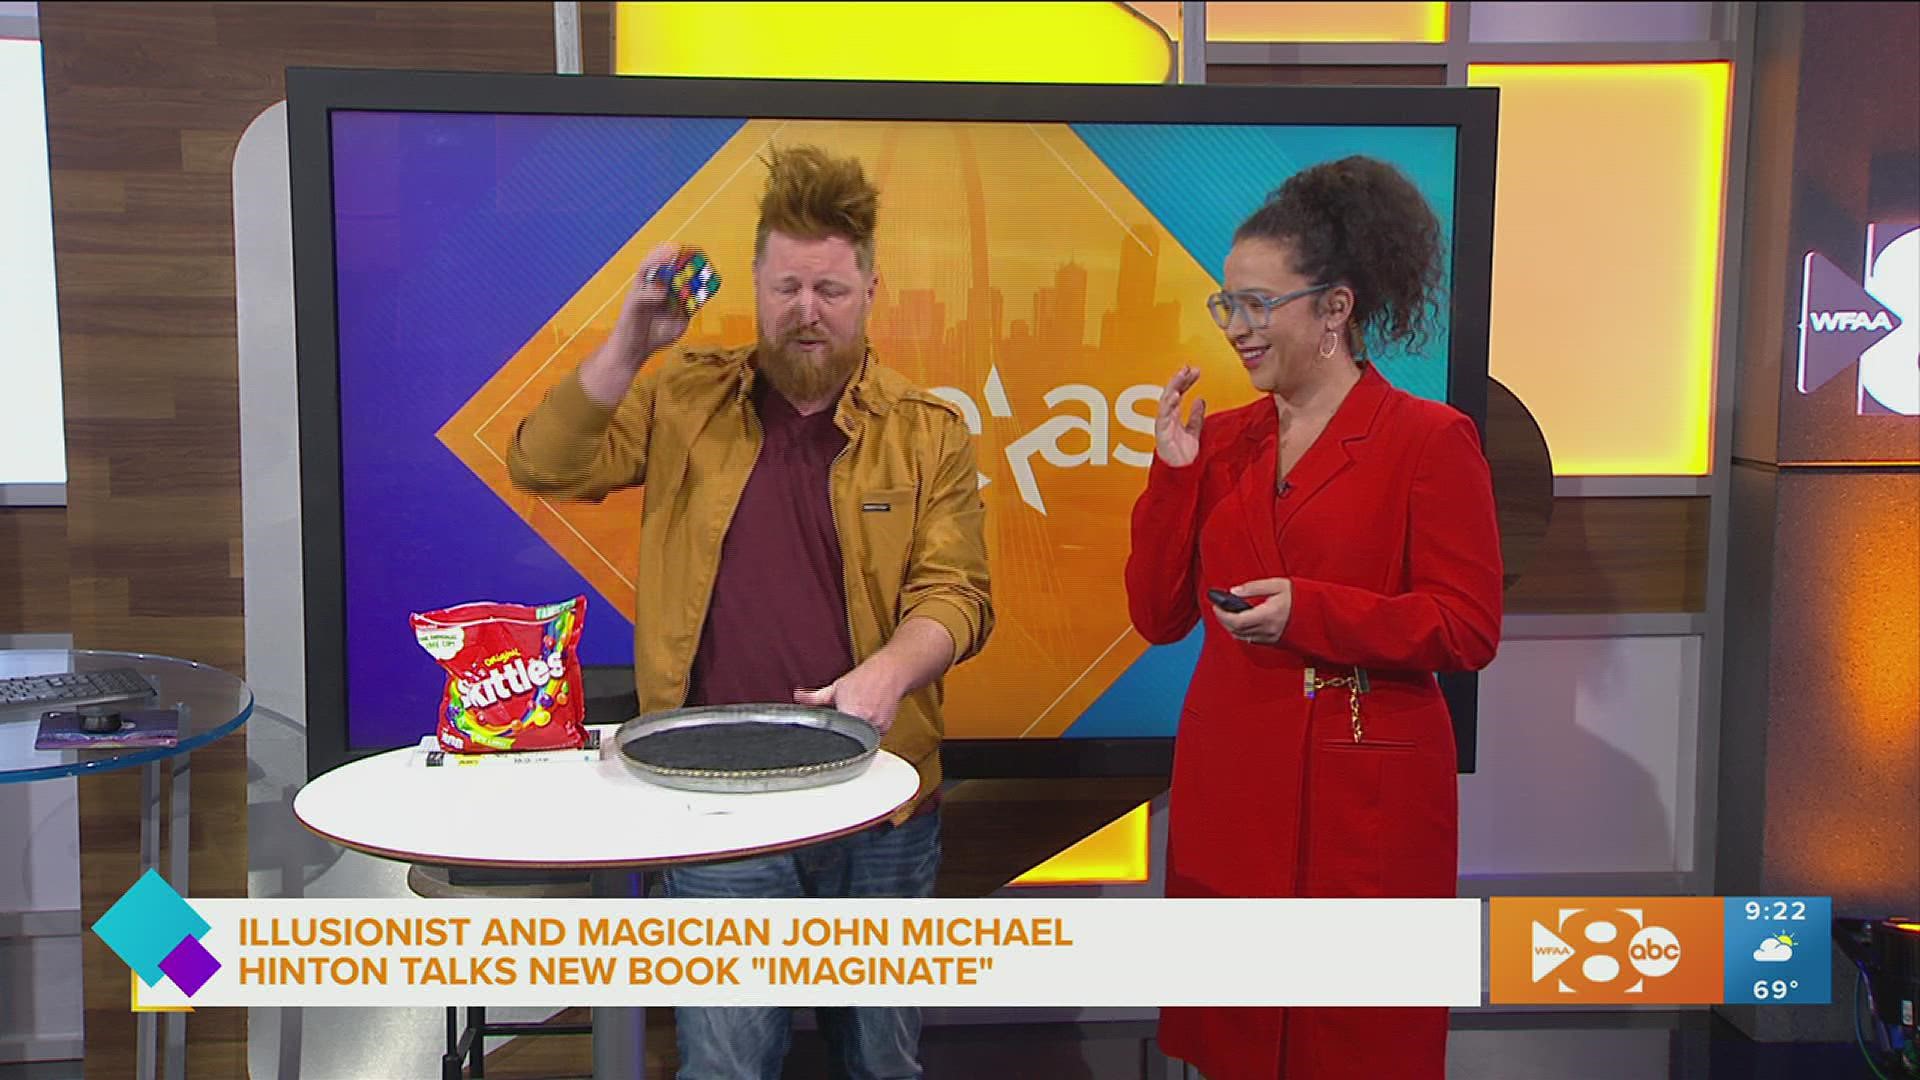 You may recognize him from Penn & Teller's "Fool Us" -- illusionist, author, Dallas resident and red head -- John Michael Hinton gives Hannah a taste of his talent.